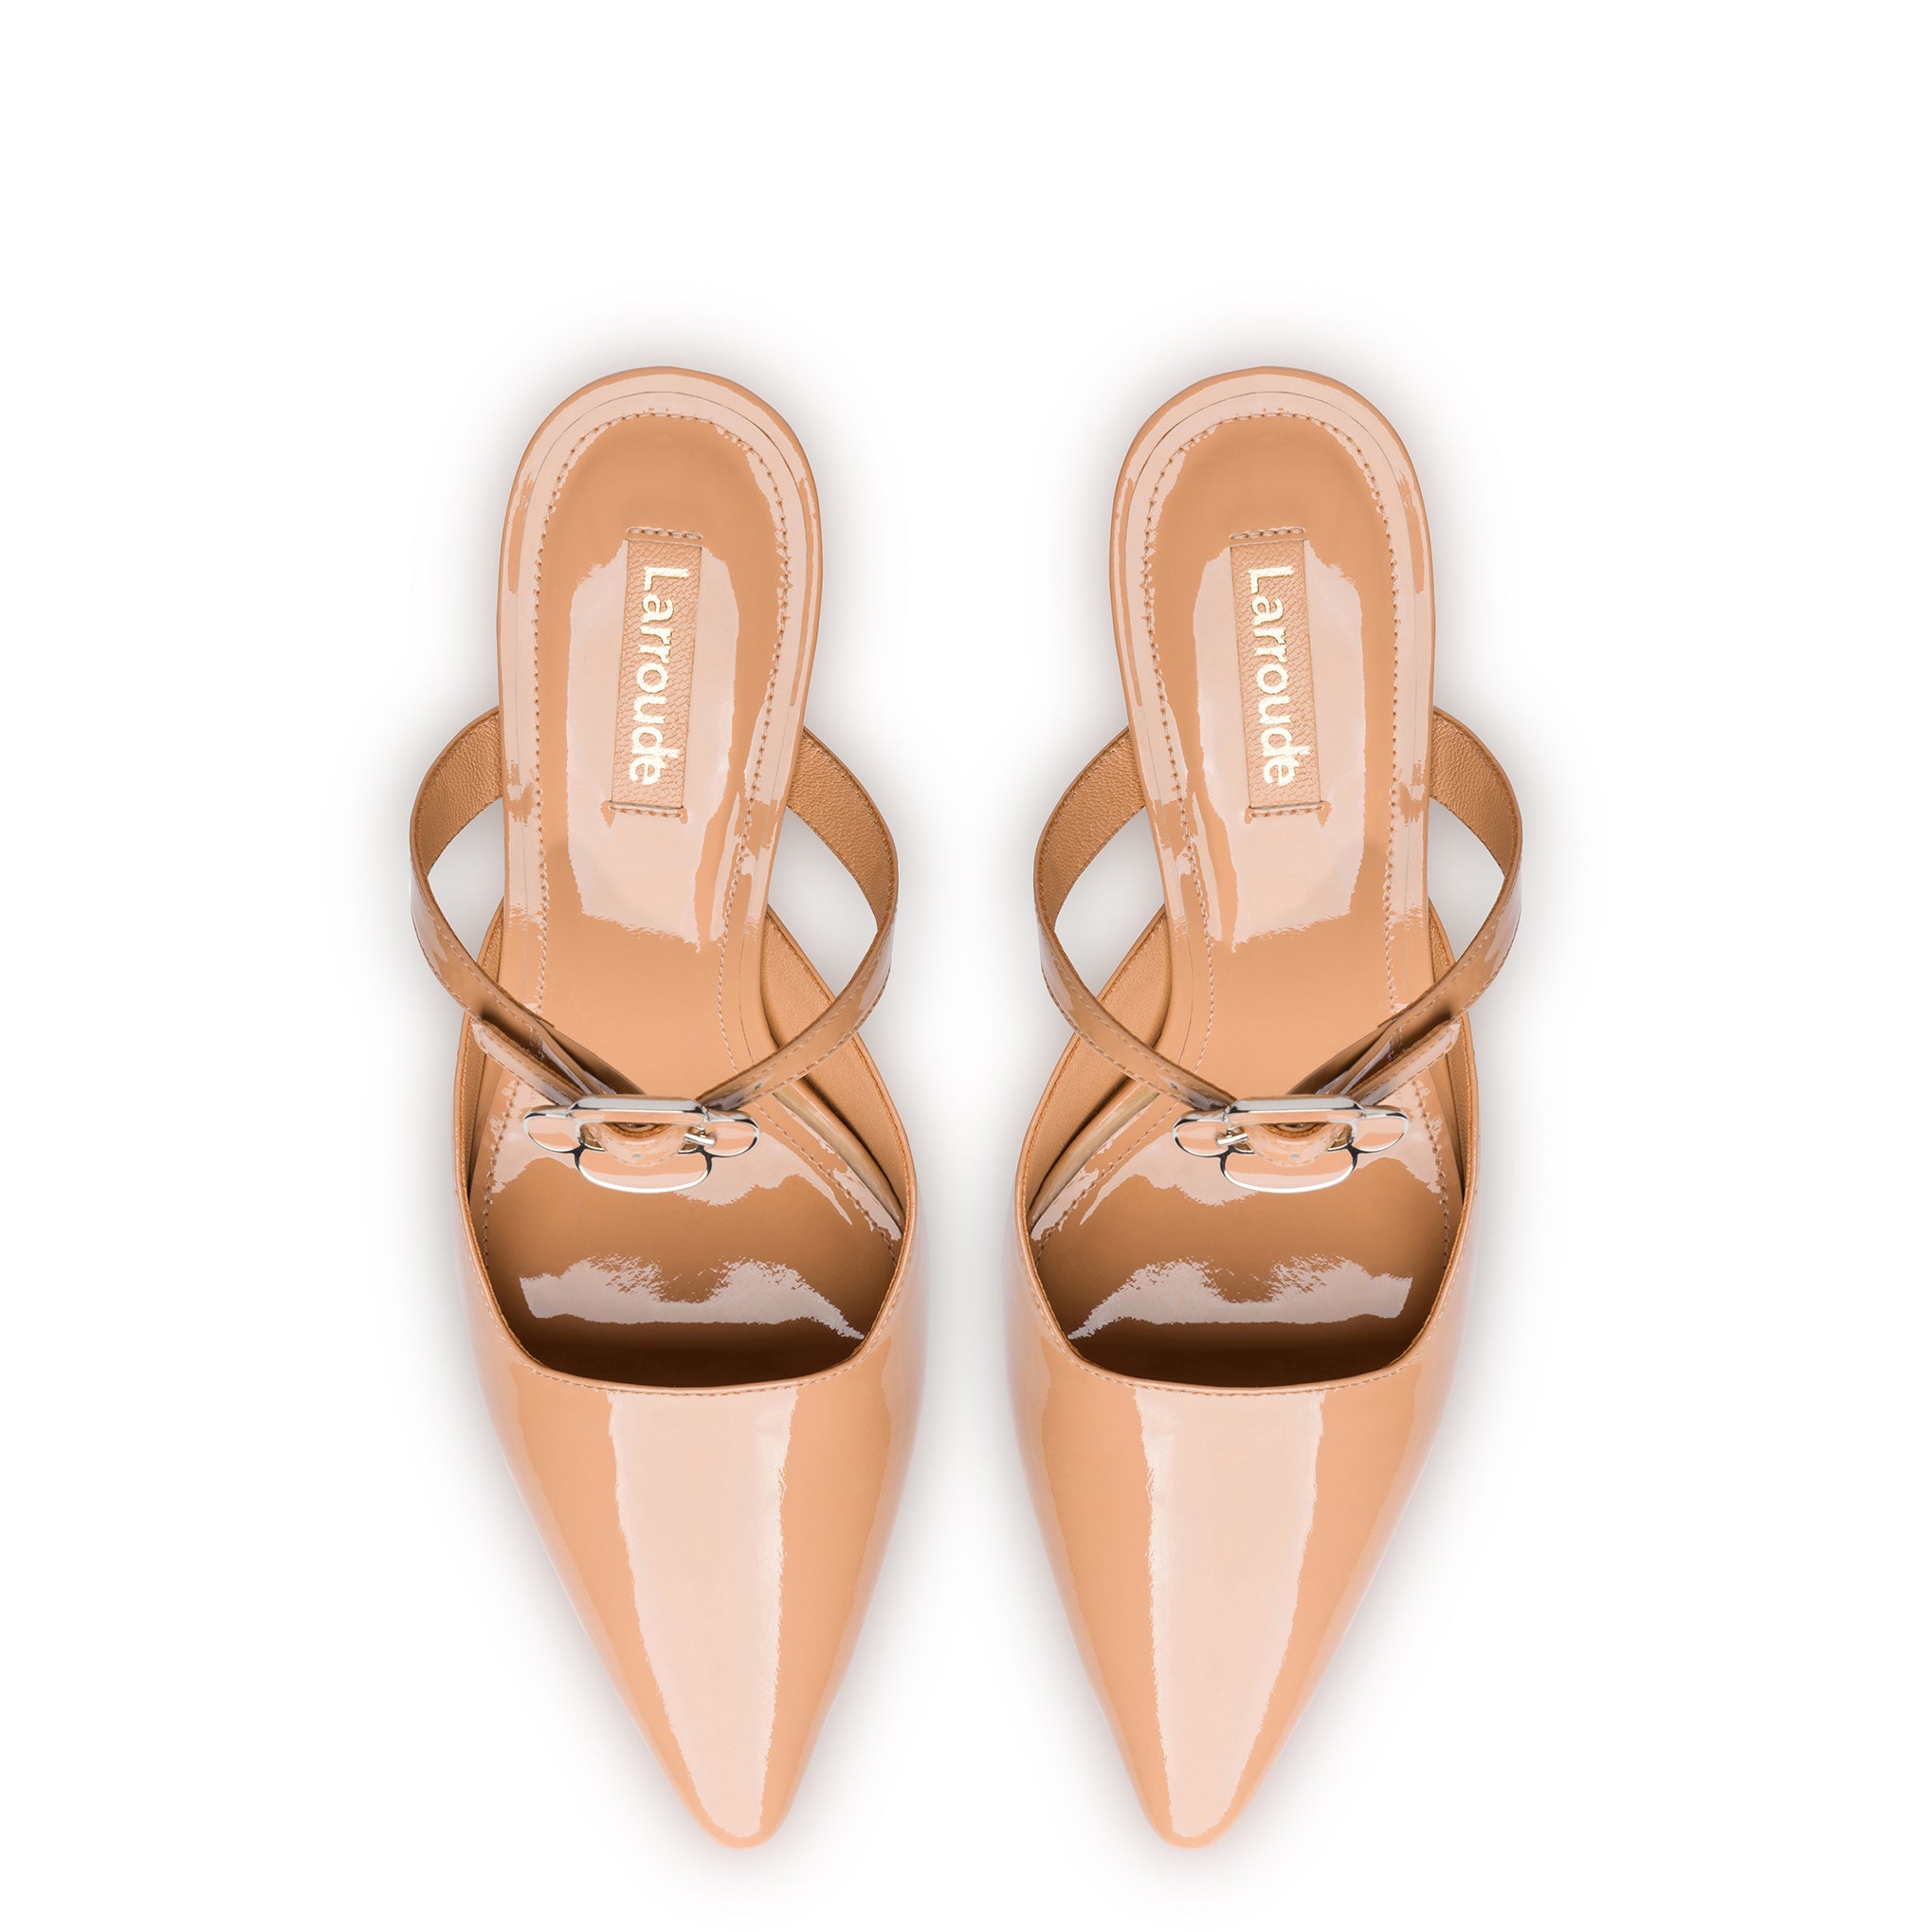 Daisy Pump In Tan Patent Leather